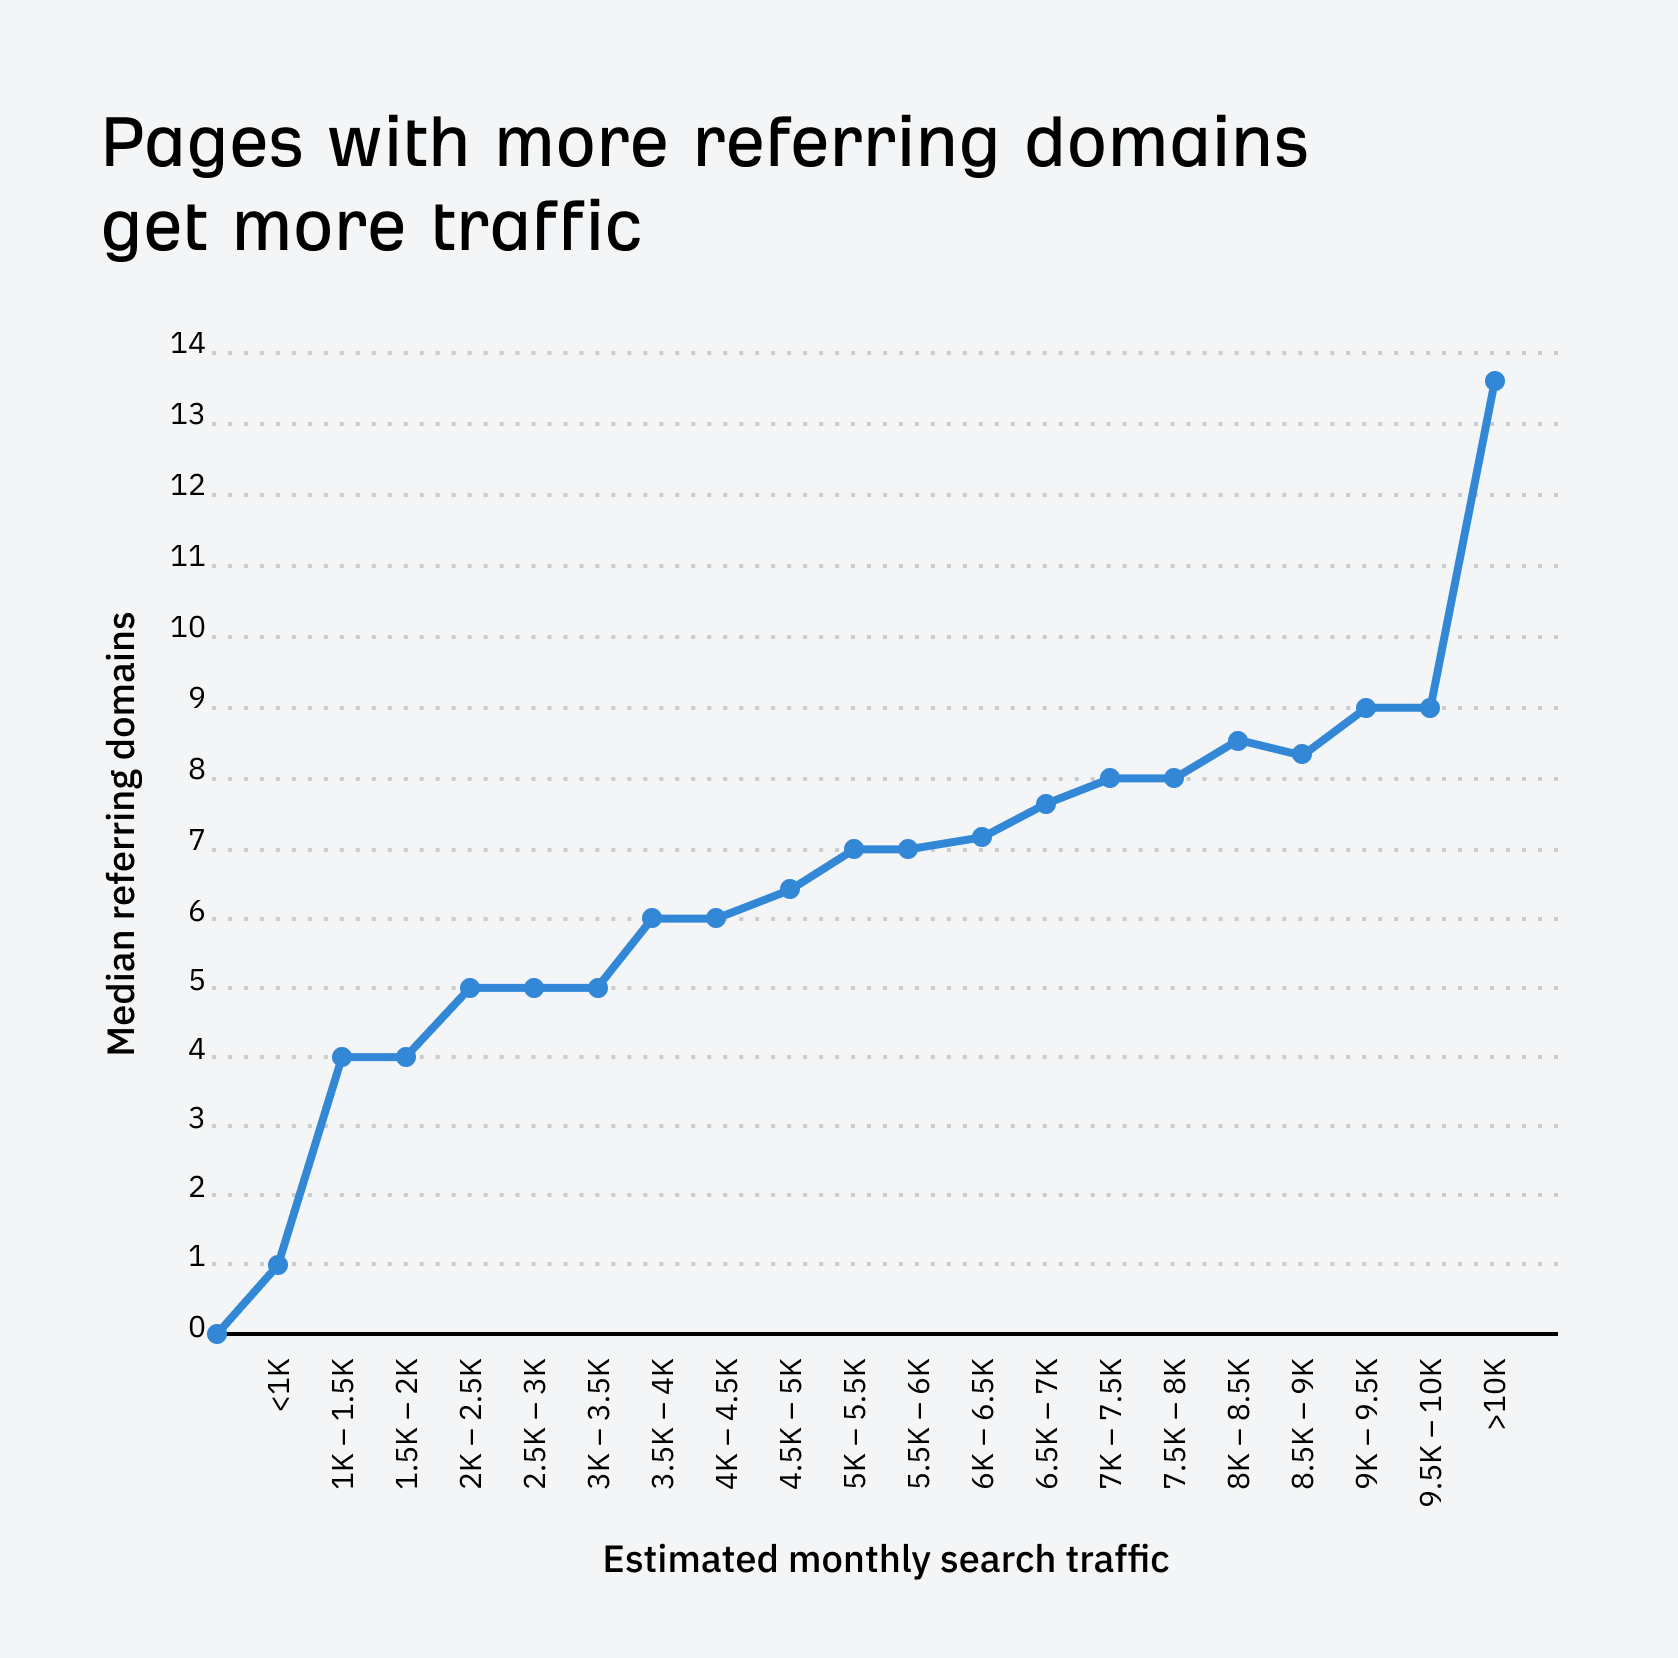 Pages with more referring domains get more traffic